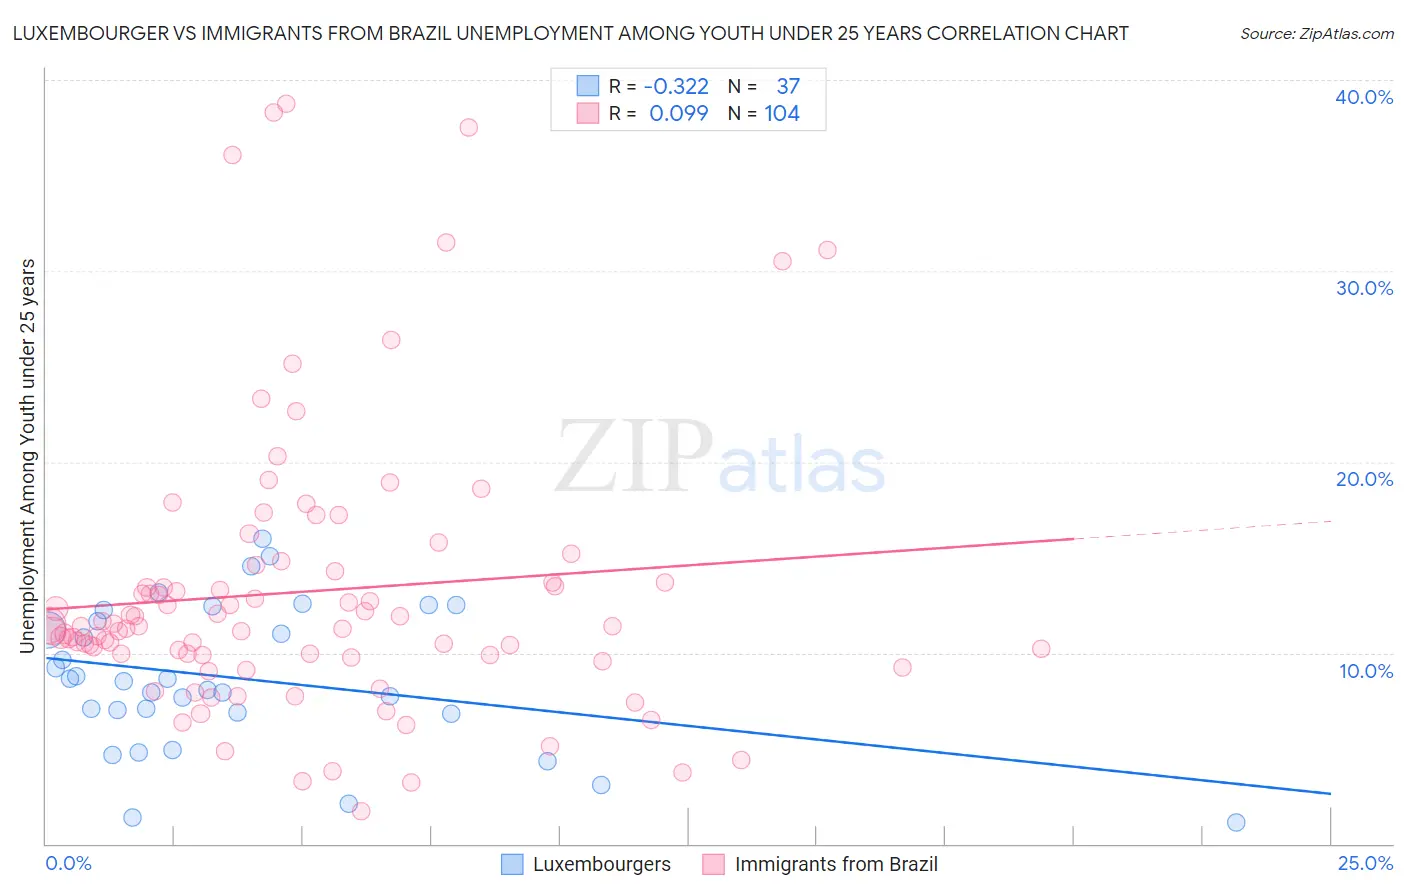 Luxembourger vs Immigrants from Brazil Unemployment Among Youth under 25 years